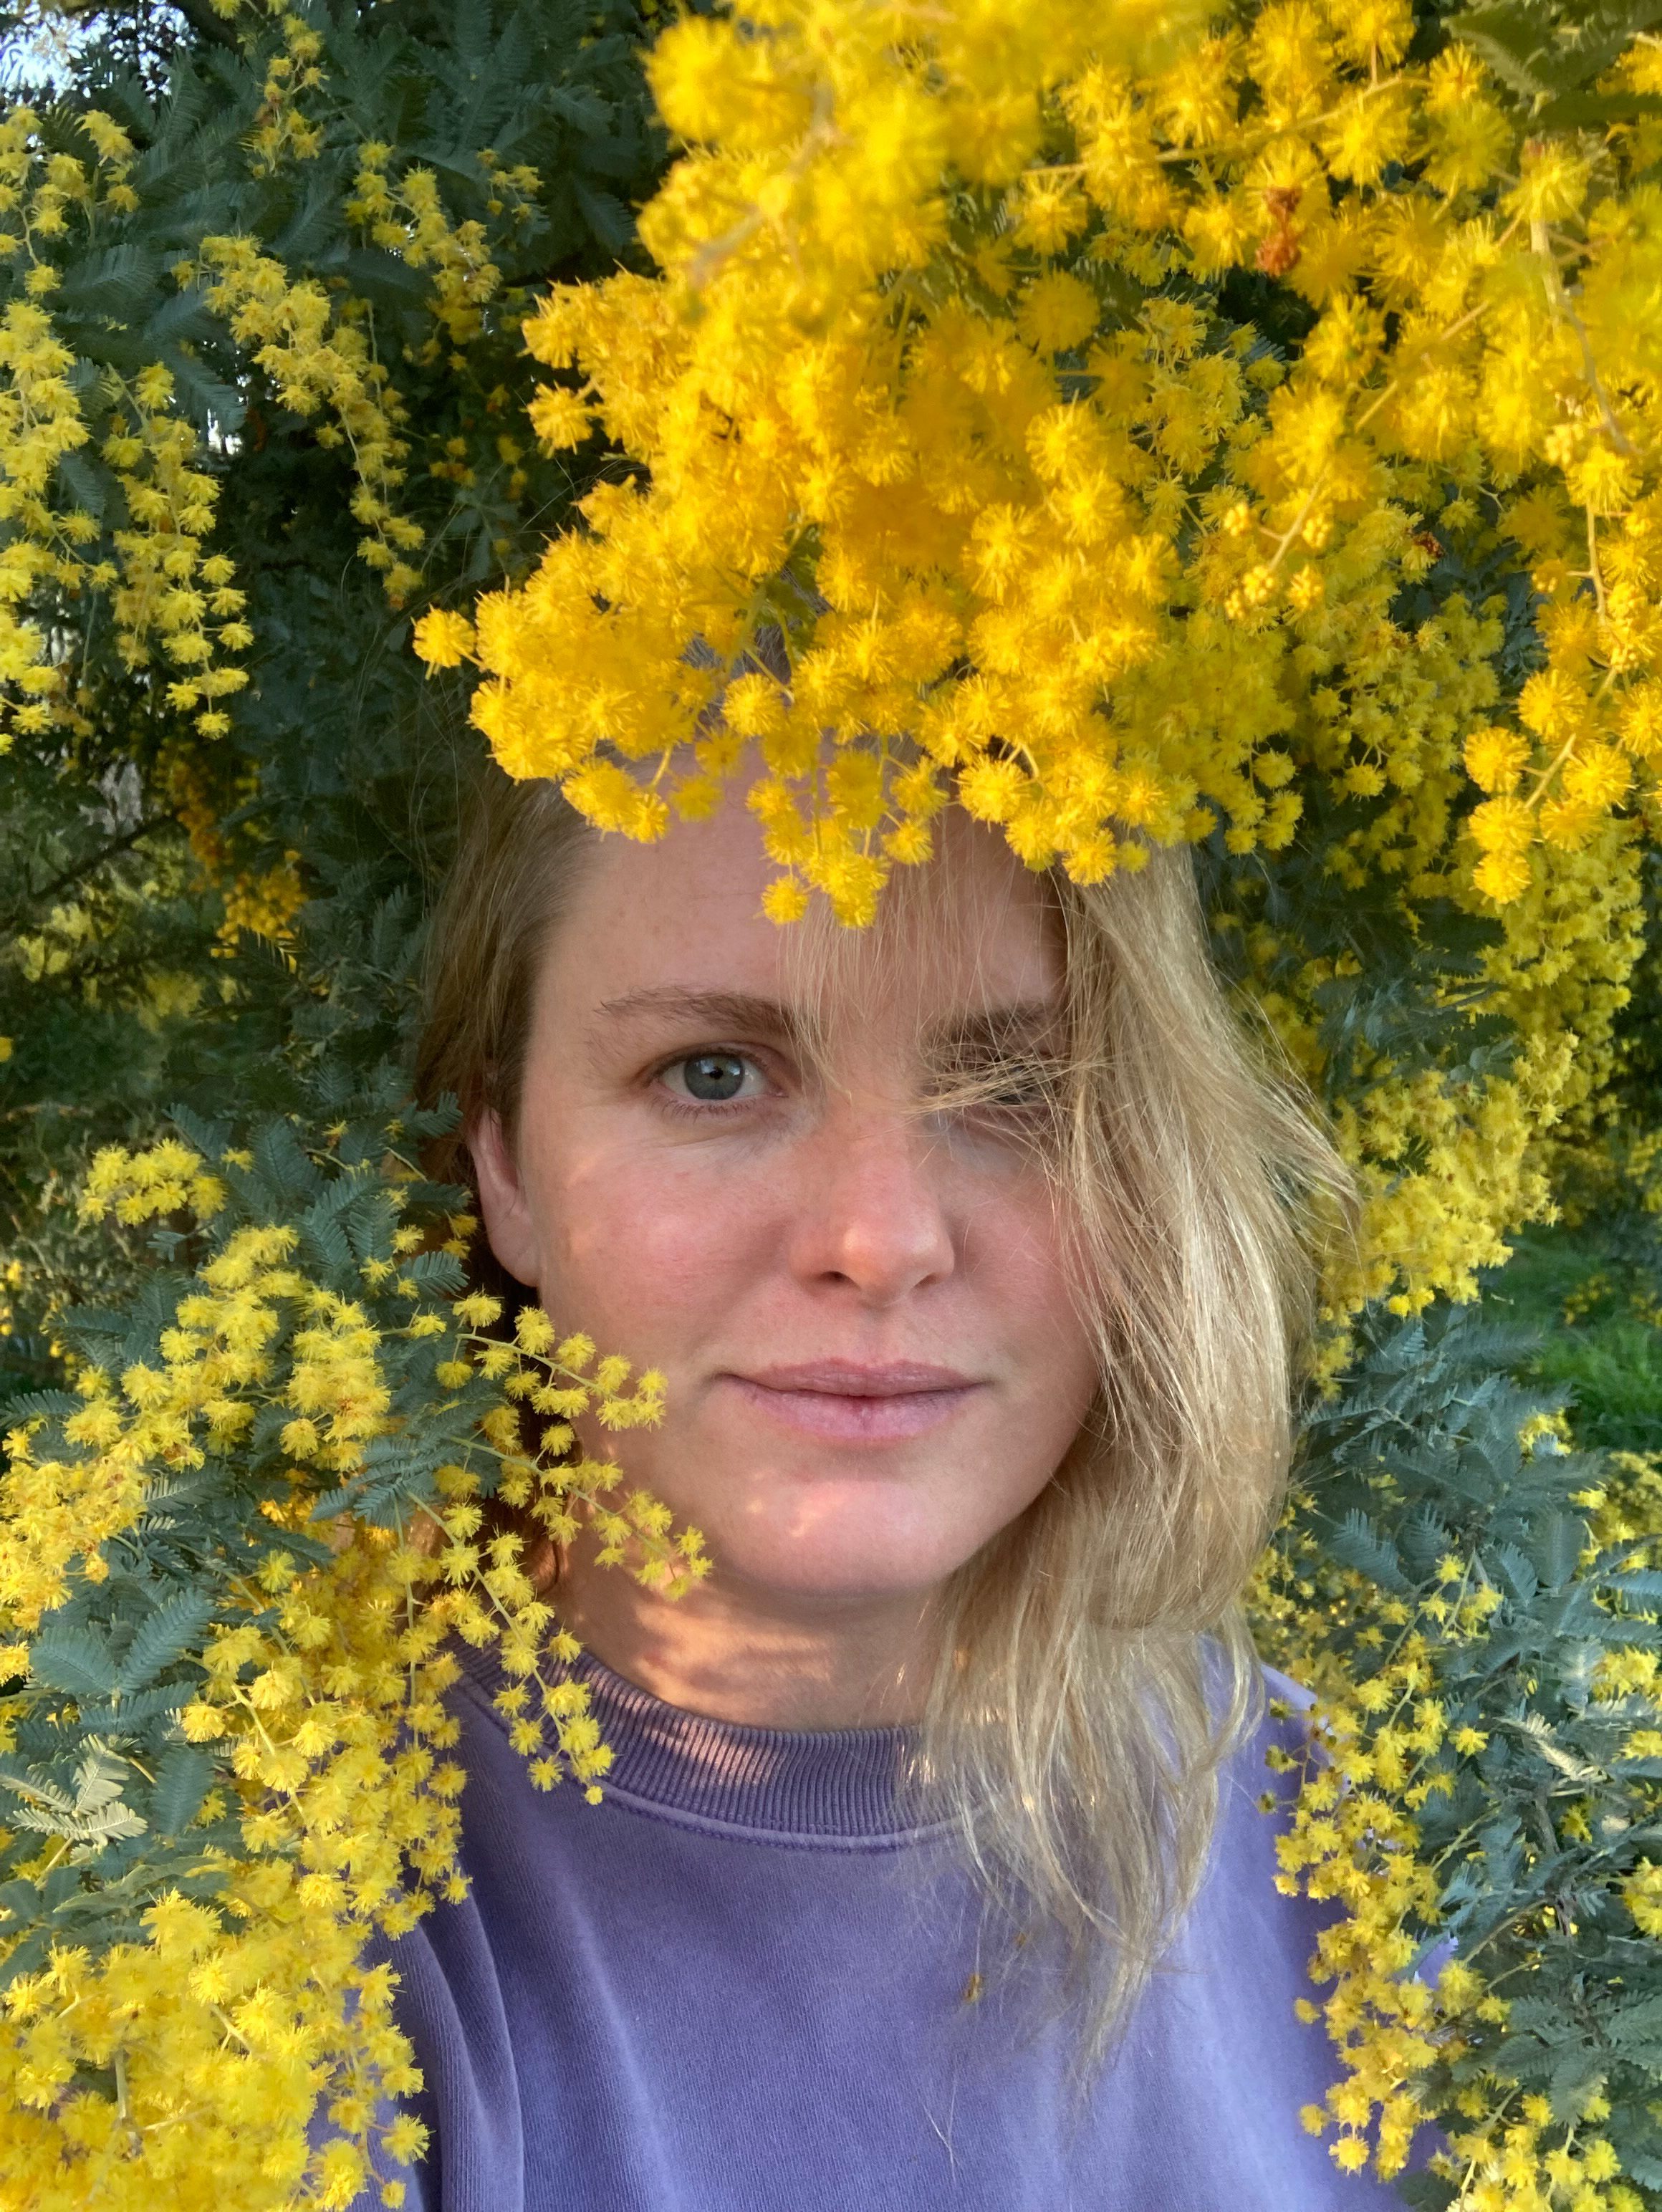 A woman with blond hair looks out at the camera from within a wattle bush